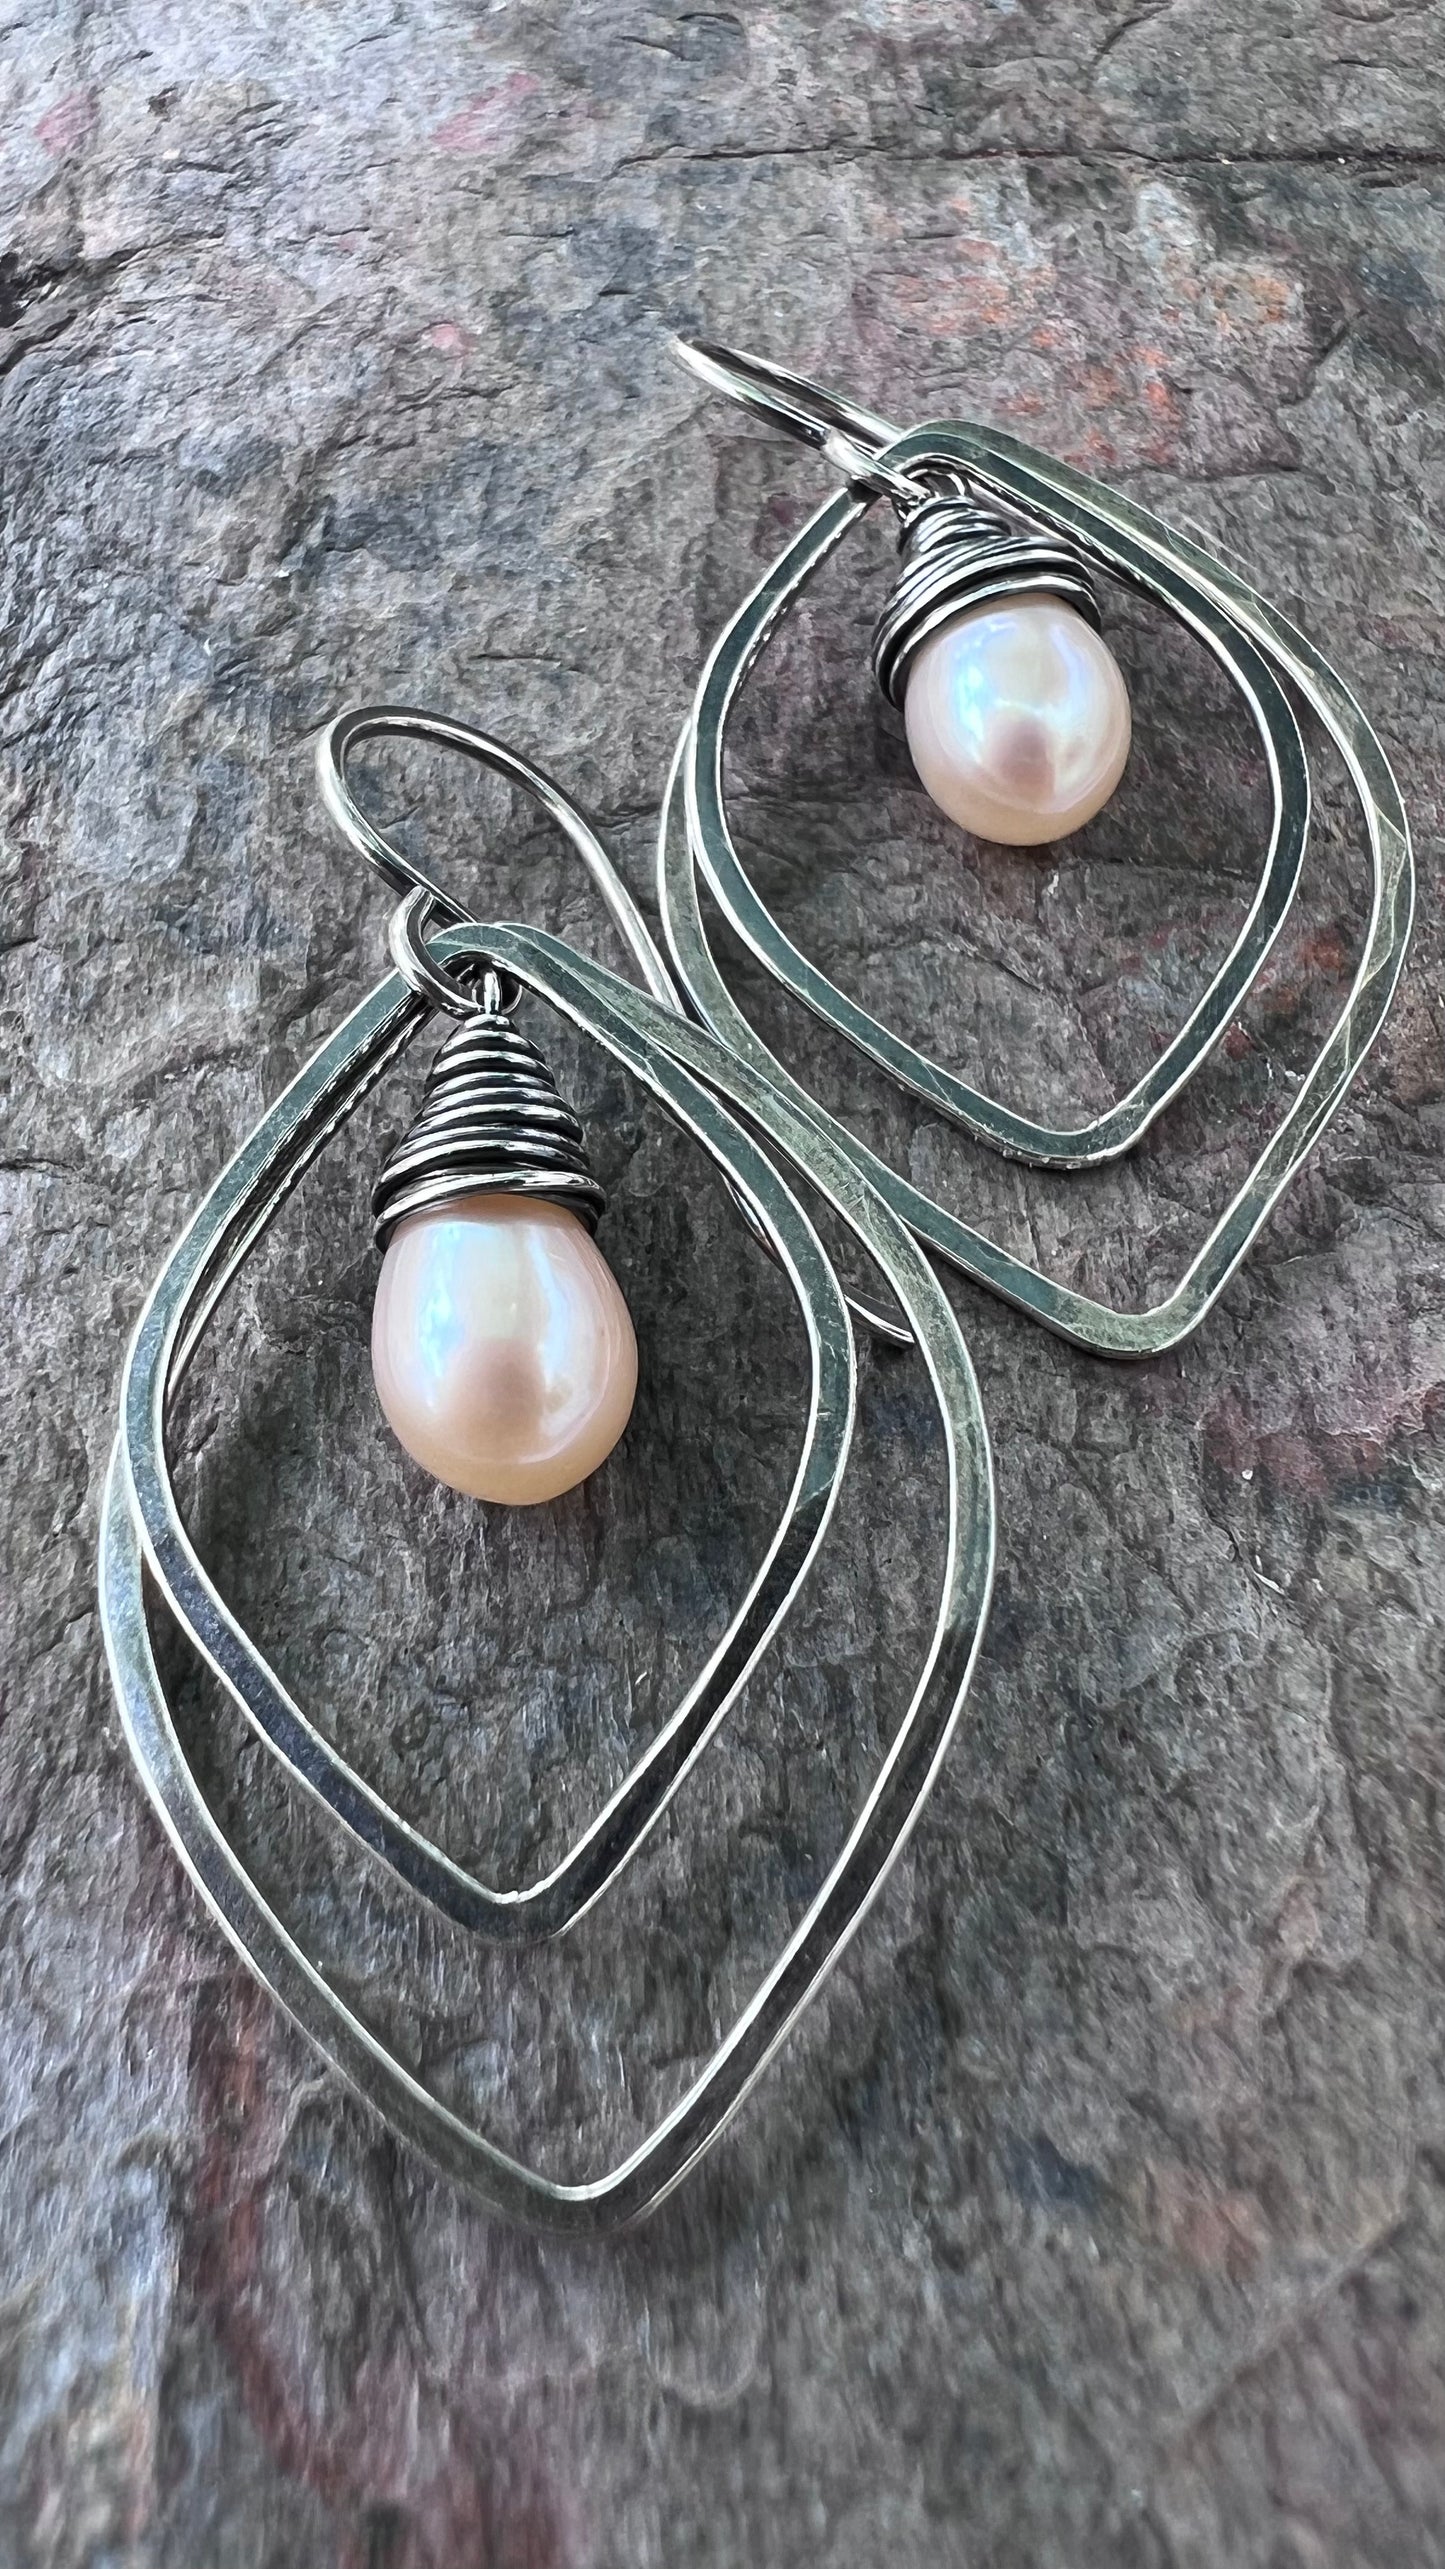 Pearl and Sterling Silver Earrings - Wire-Wrapped Pearls inside textured Petals on Handmade Sterling Silver Earwires